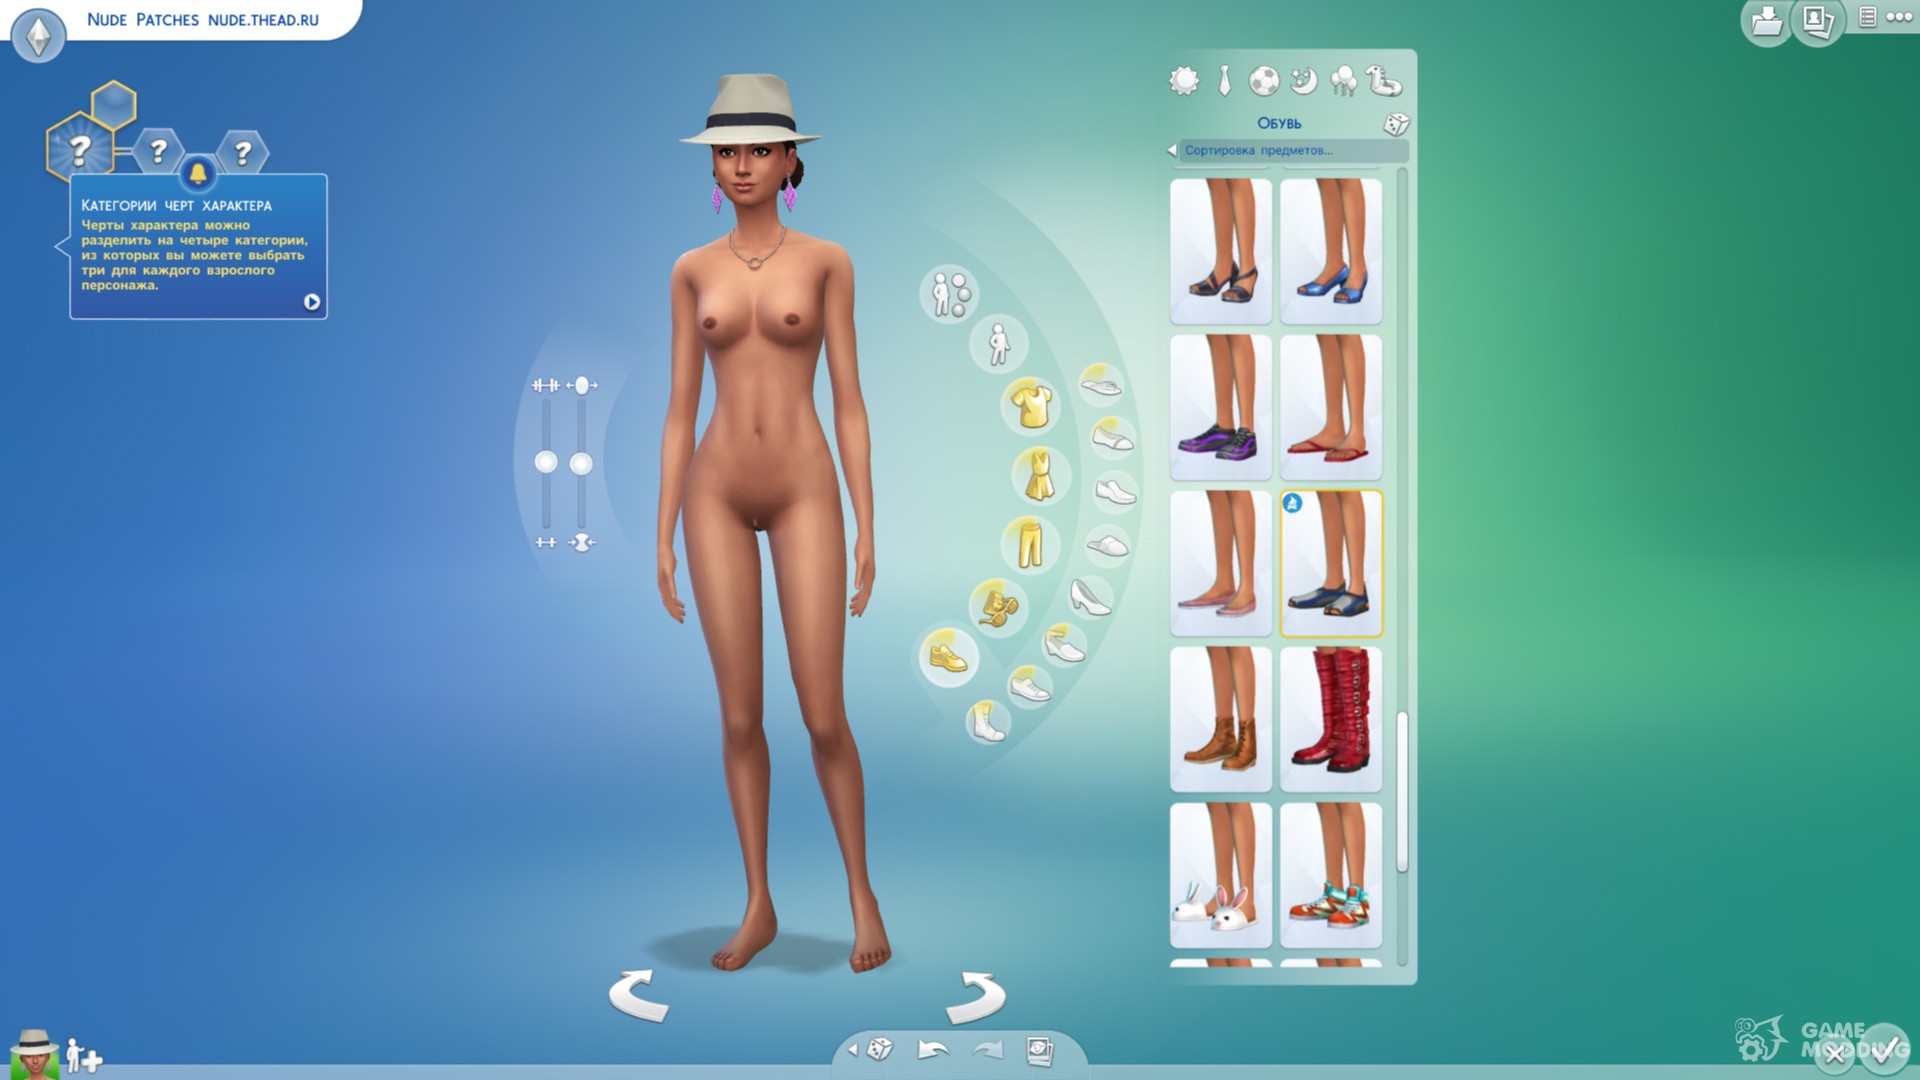 Best of The sims nude patch